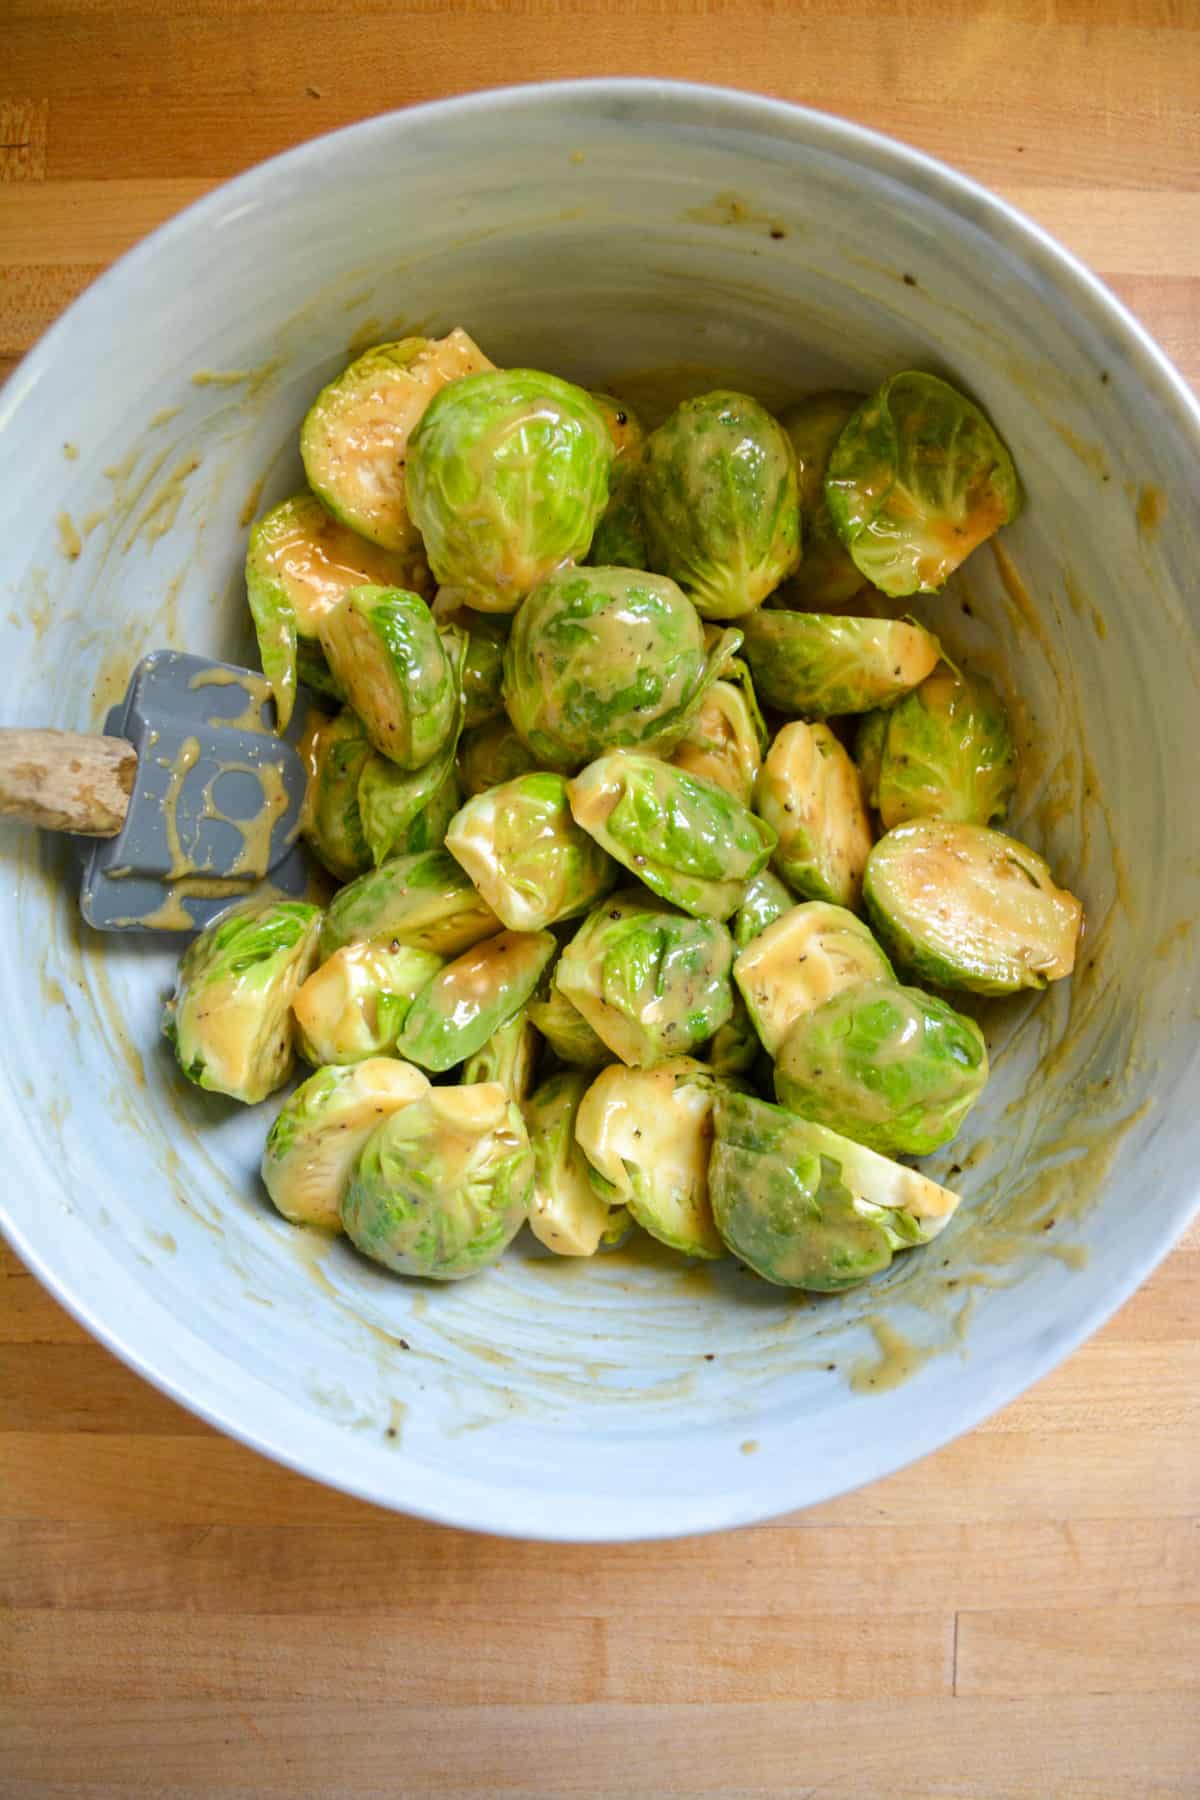 Brussels sprouts tossed in the sauce in a marble bowl.